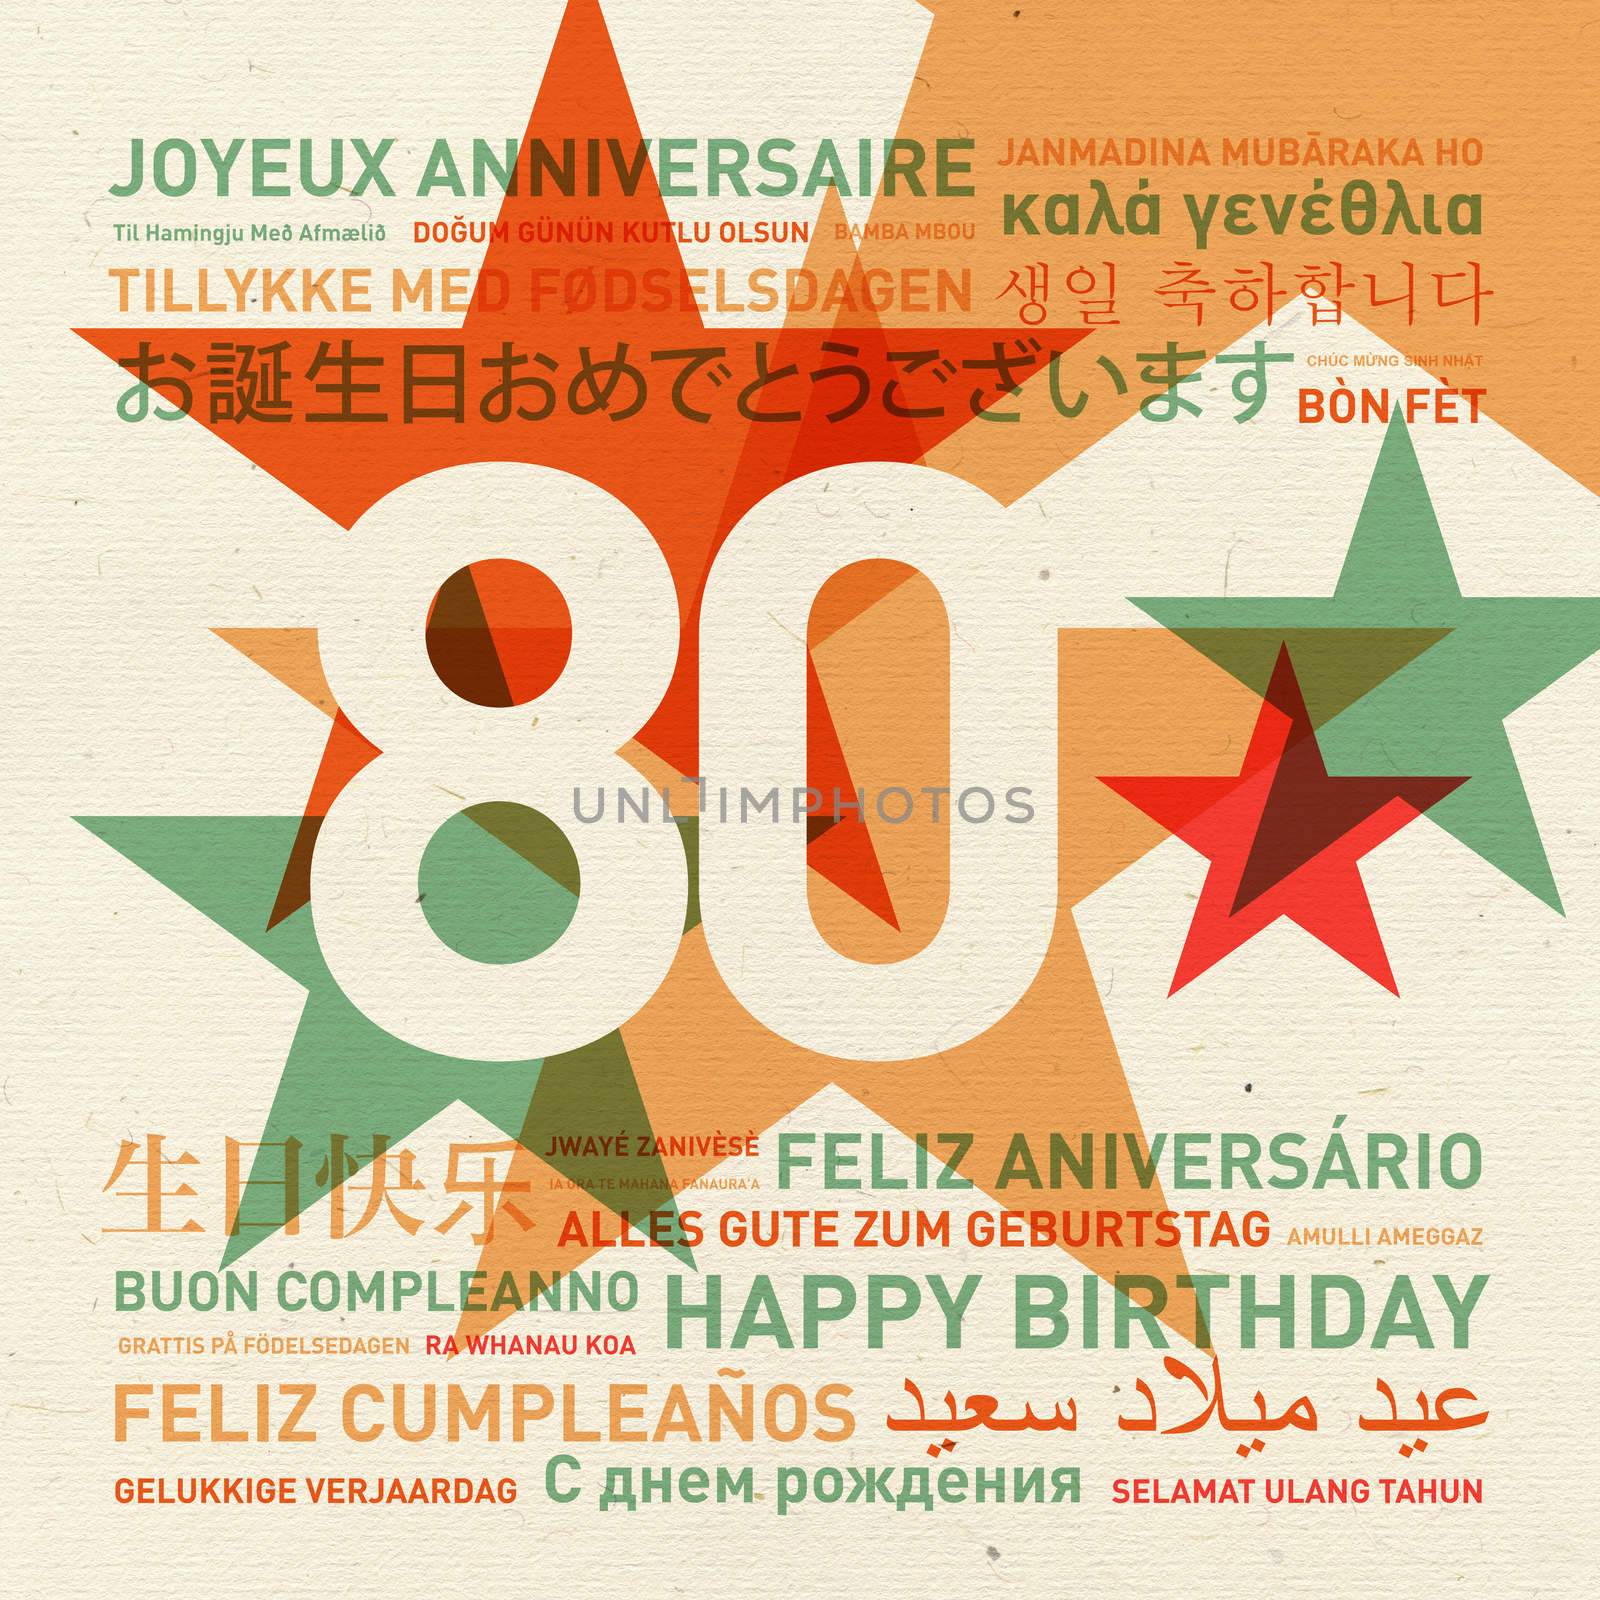 80th anniversary happy birthday from the world. Different languages celebration card